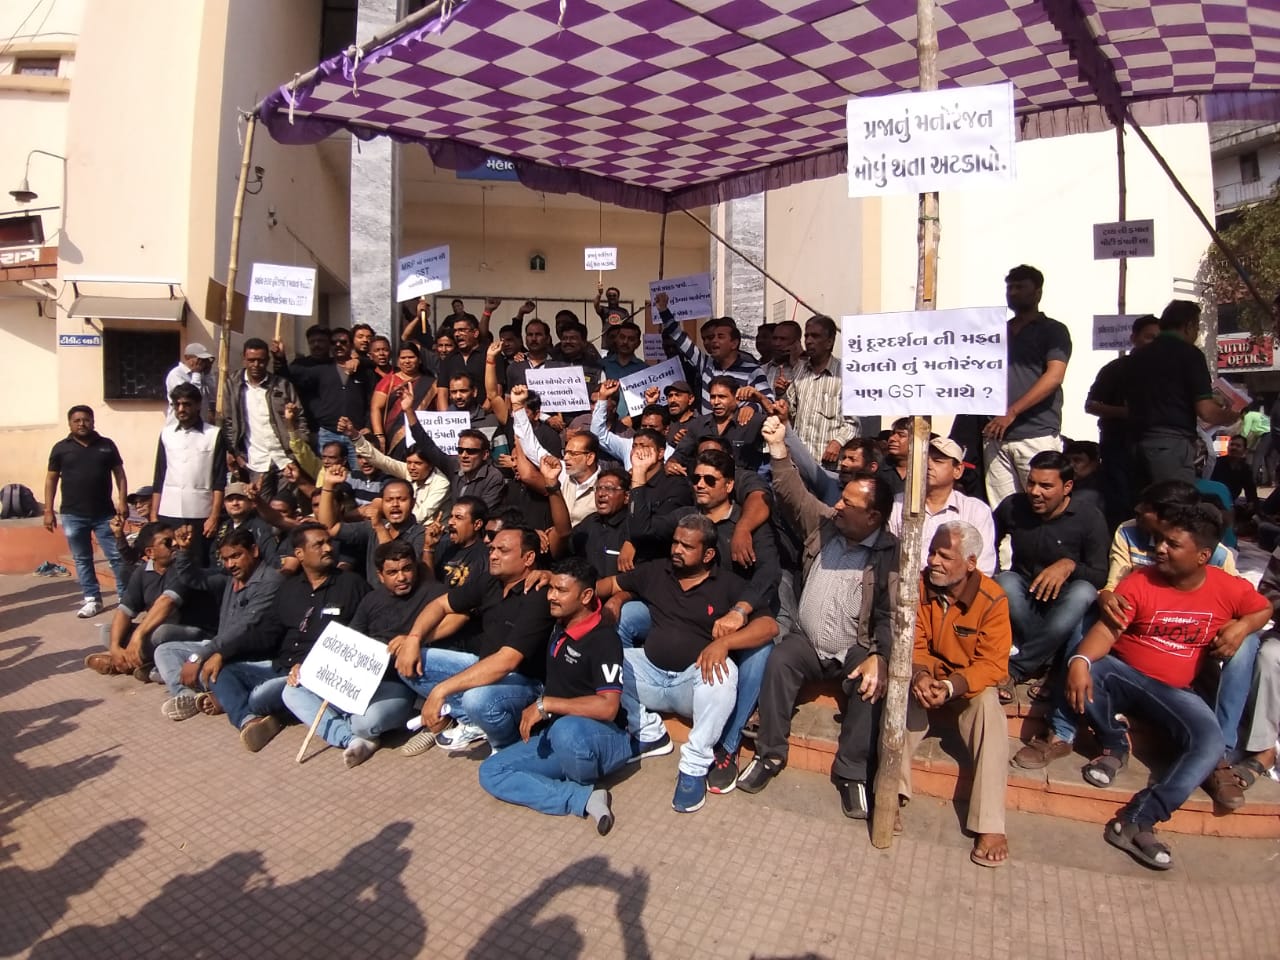 Cable operators in Vadodara protest against the TRAI decision of channel price as per the MRP